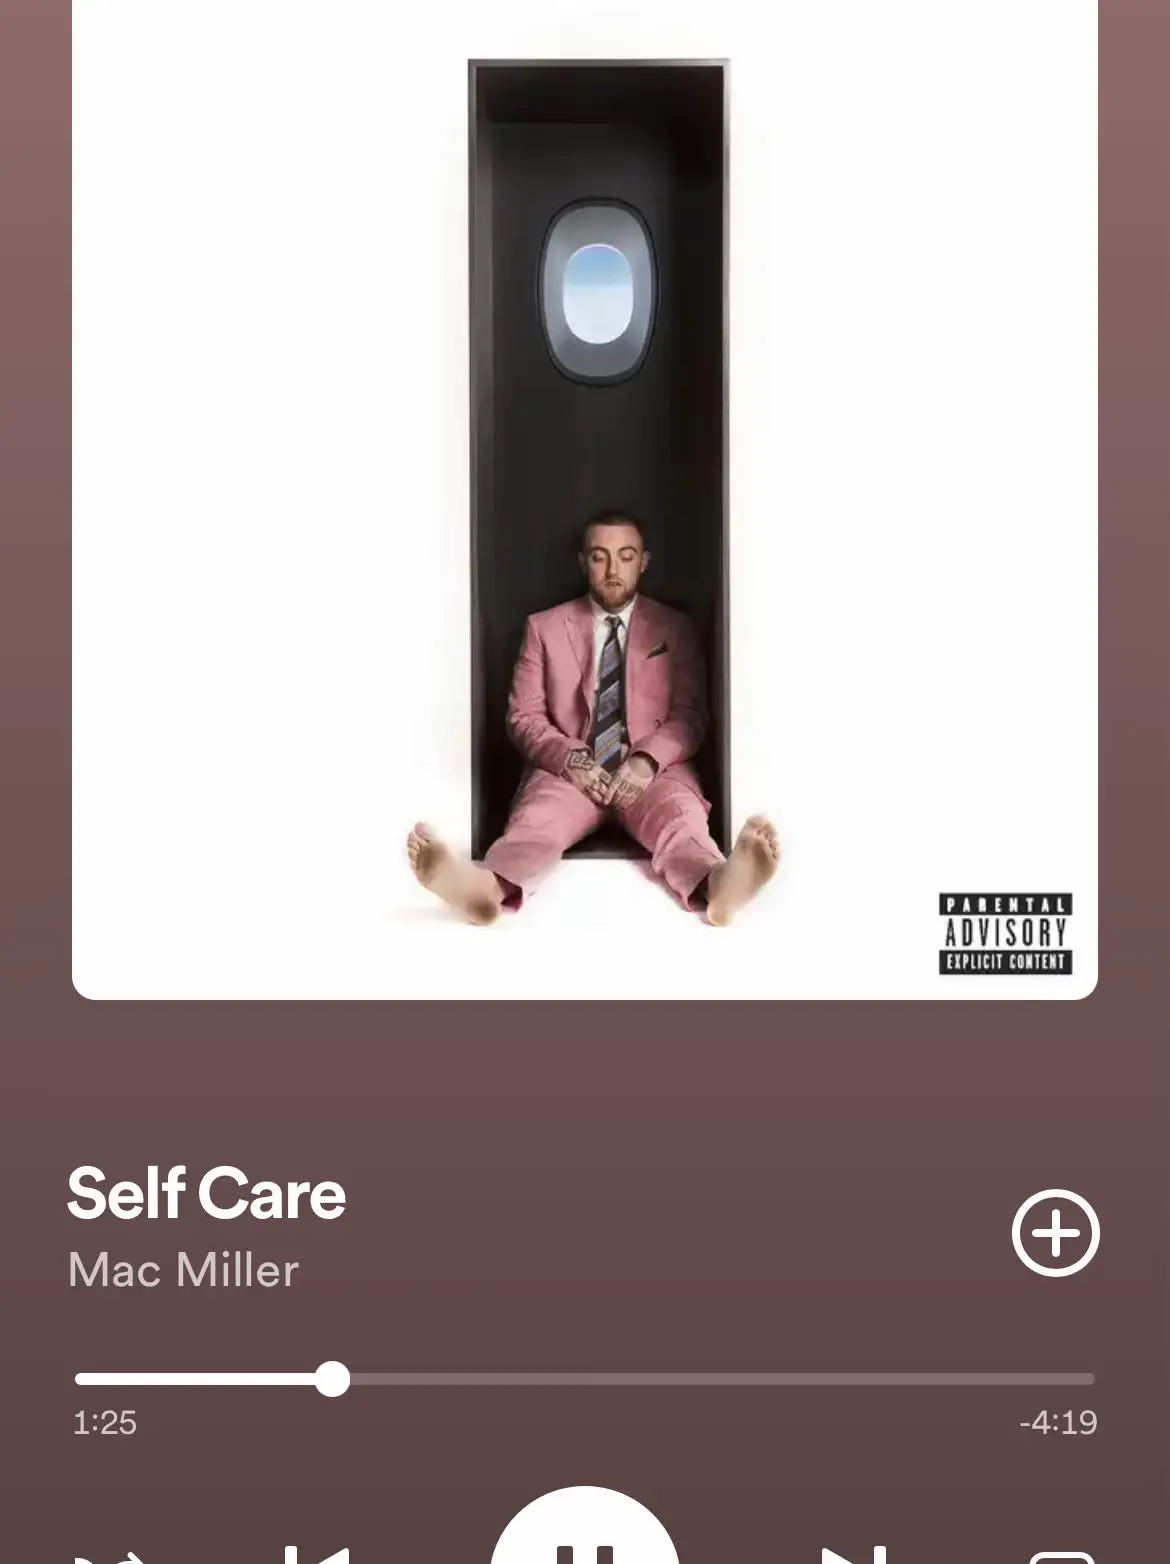  A song by Mac Miller with a pink jacket.